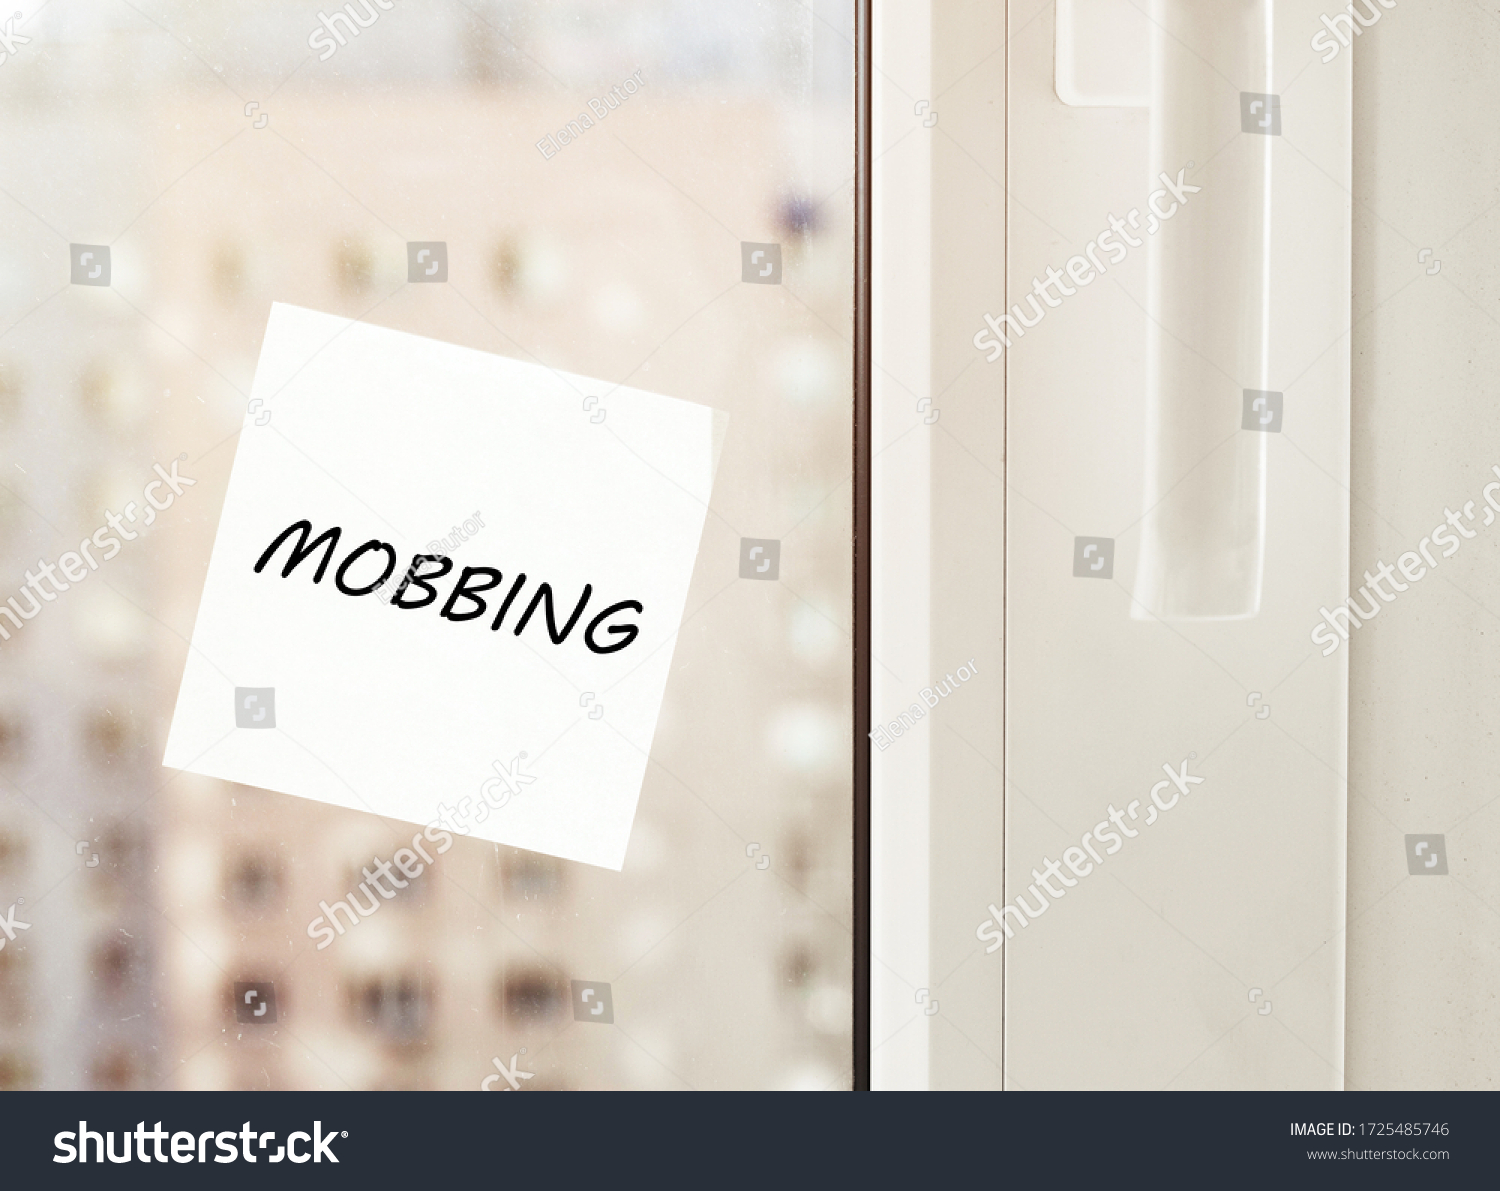 Paper with text mobbing for text with background #1725485746